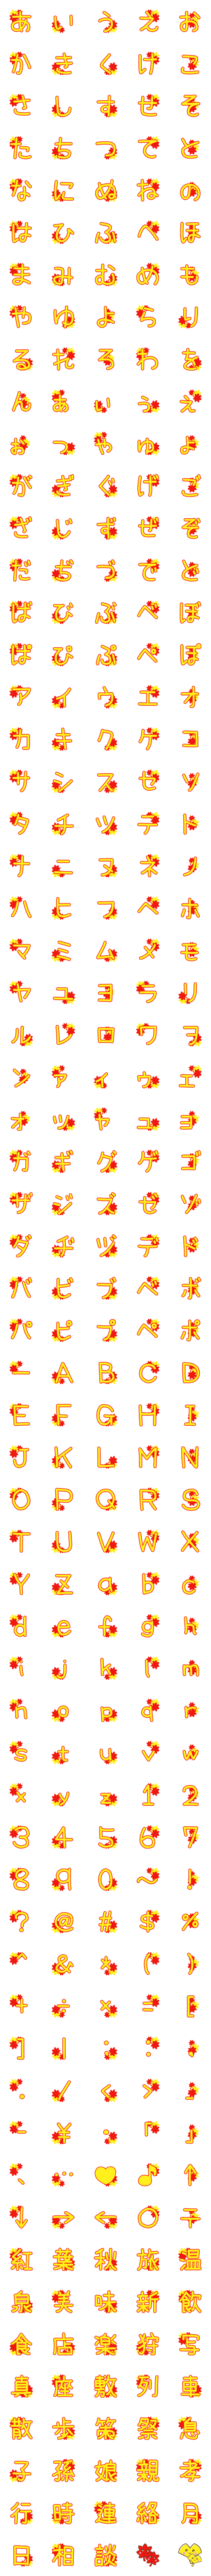 [LINE絵文字]秋は紅葉♪計305個の絵文字+デコ文字セットの画像一覧